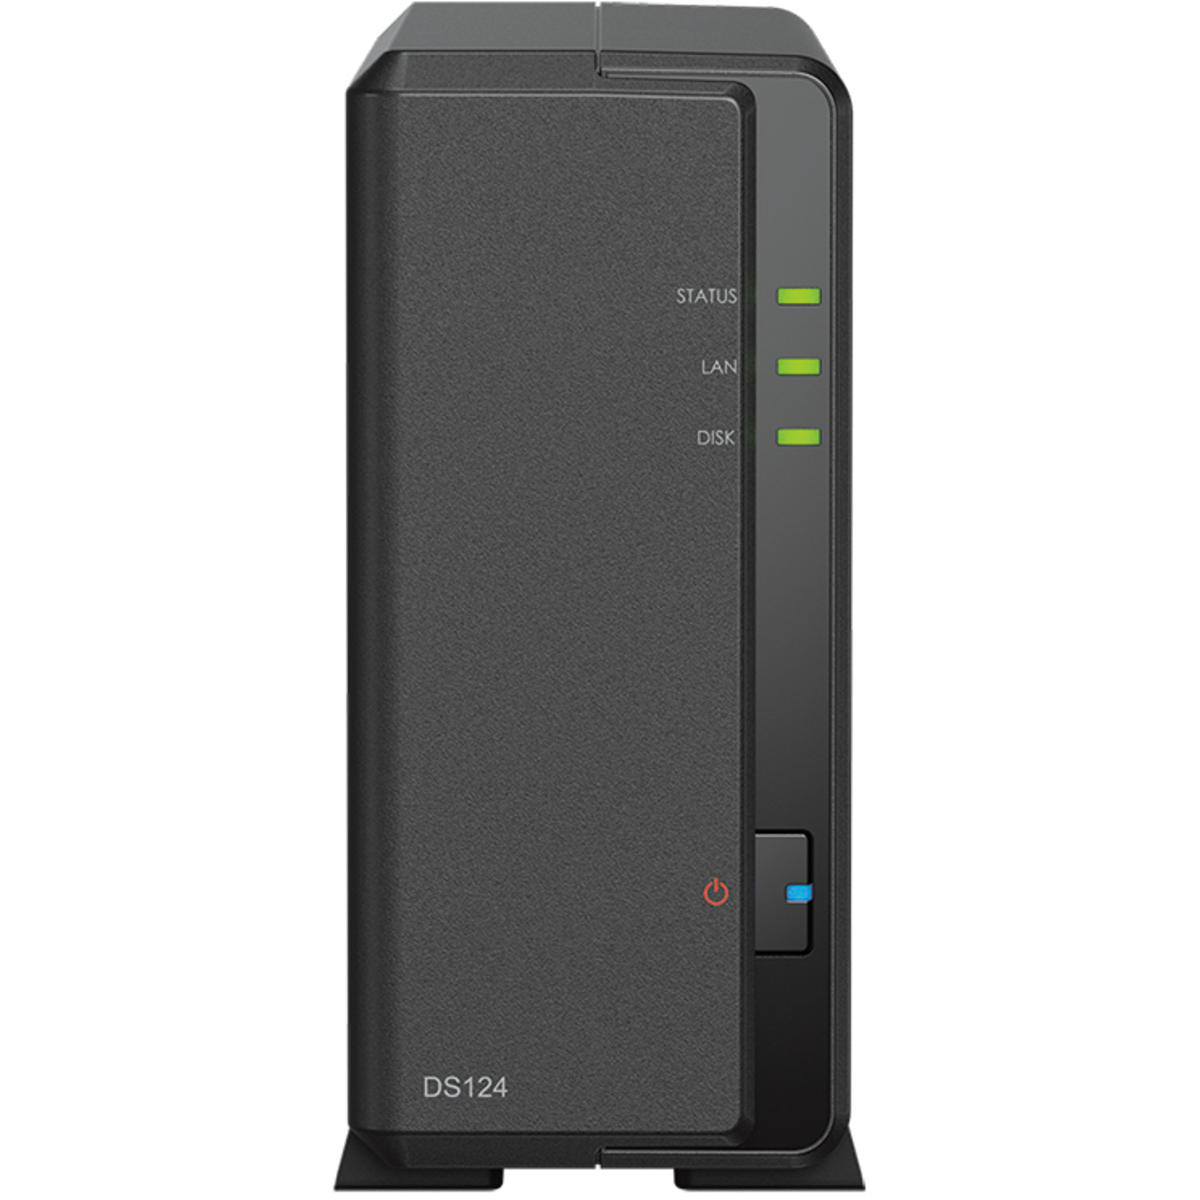 Synology DiskStation DS124 4tb 1-Bay Desktop Personal / Basic Home / Small Office NAS - Network Attached Storage Device 1x4tb Seagate IronWolf Pro ST4000NT001 3.5 7200rpm SATA 6Gb/s HDD NAS Class Drives Installed - Burn-In Tested DiskStation DS124